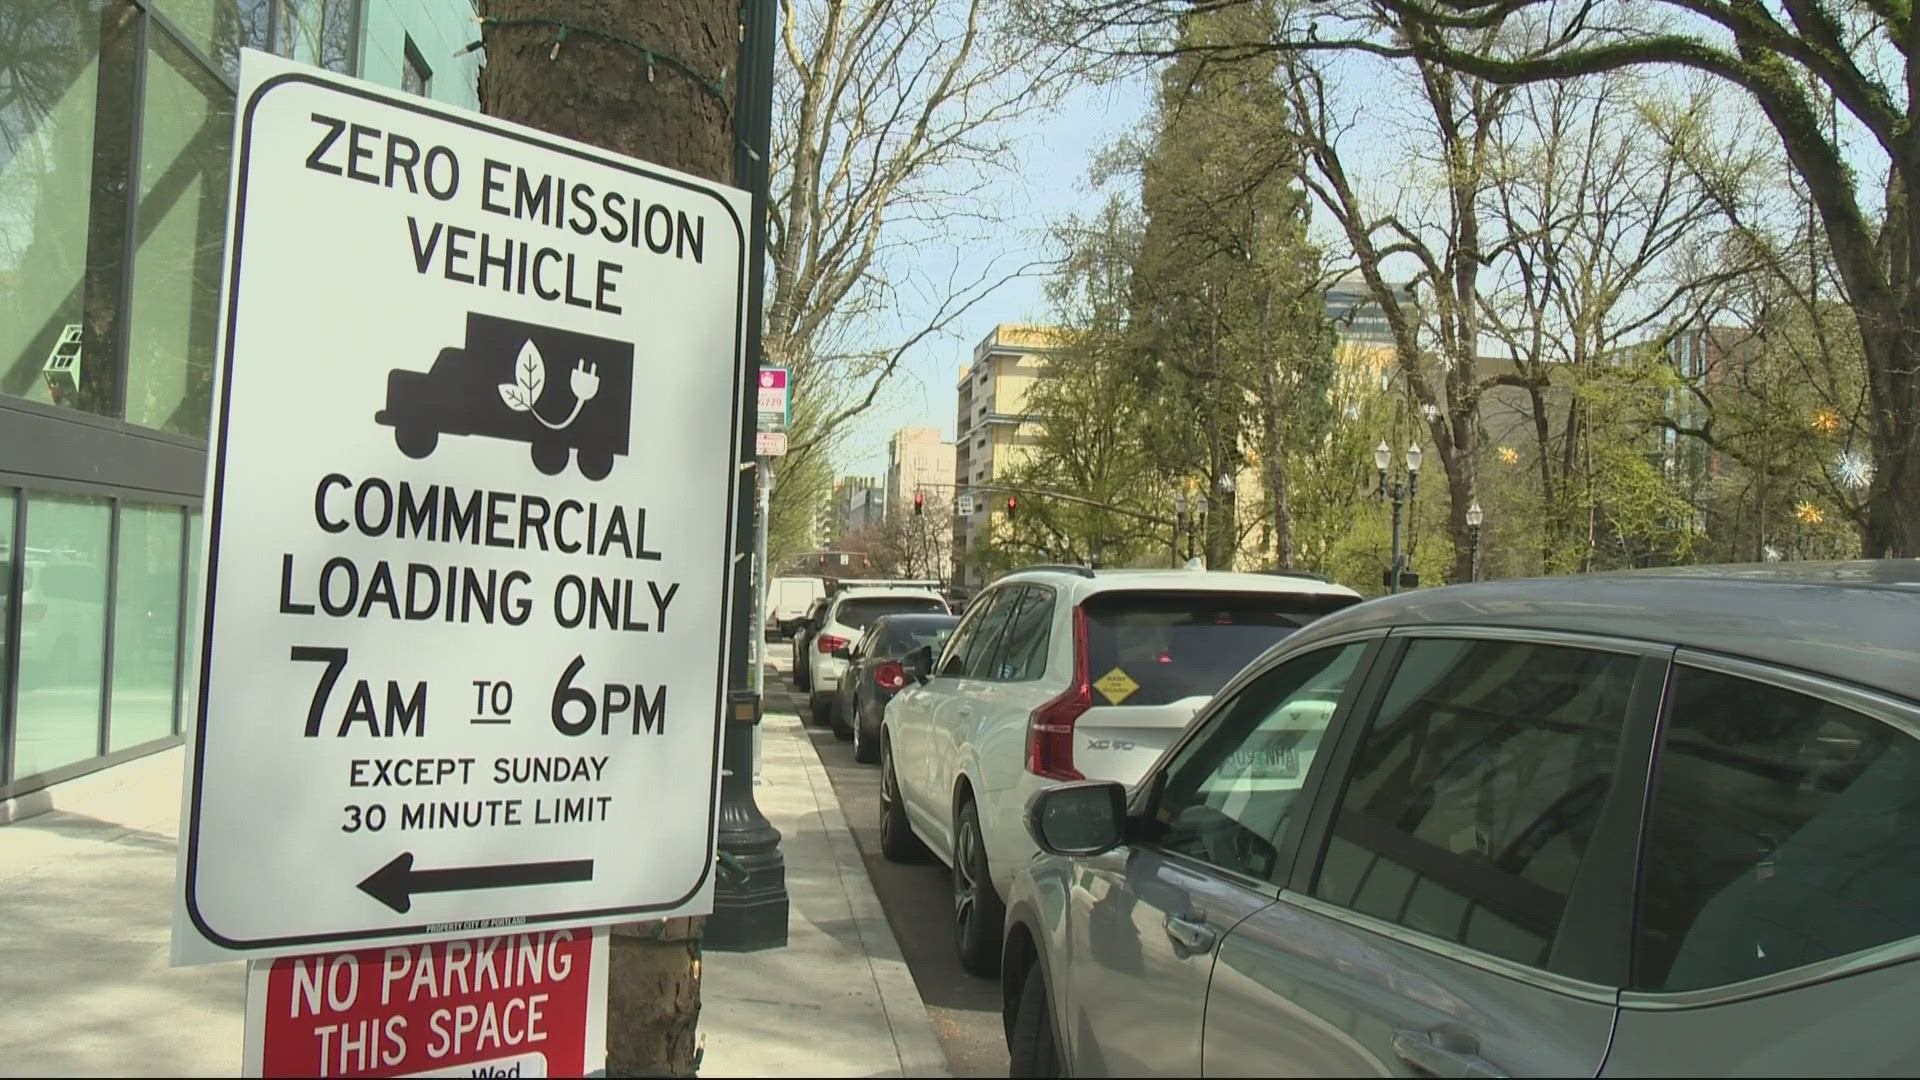 The $2M smart grant will go towards the creation of three new zero-emissions loading zones that will serve 16 city blocks.